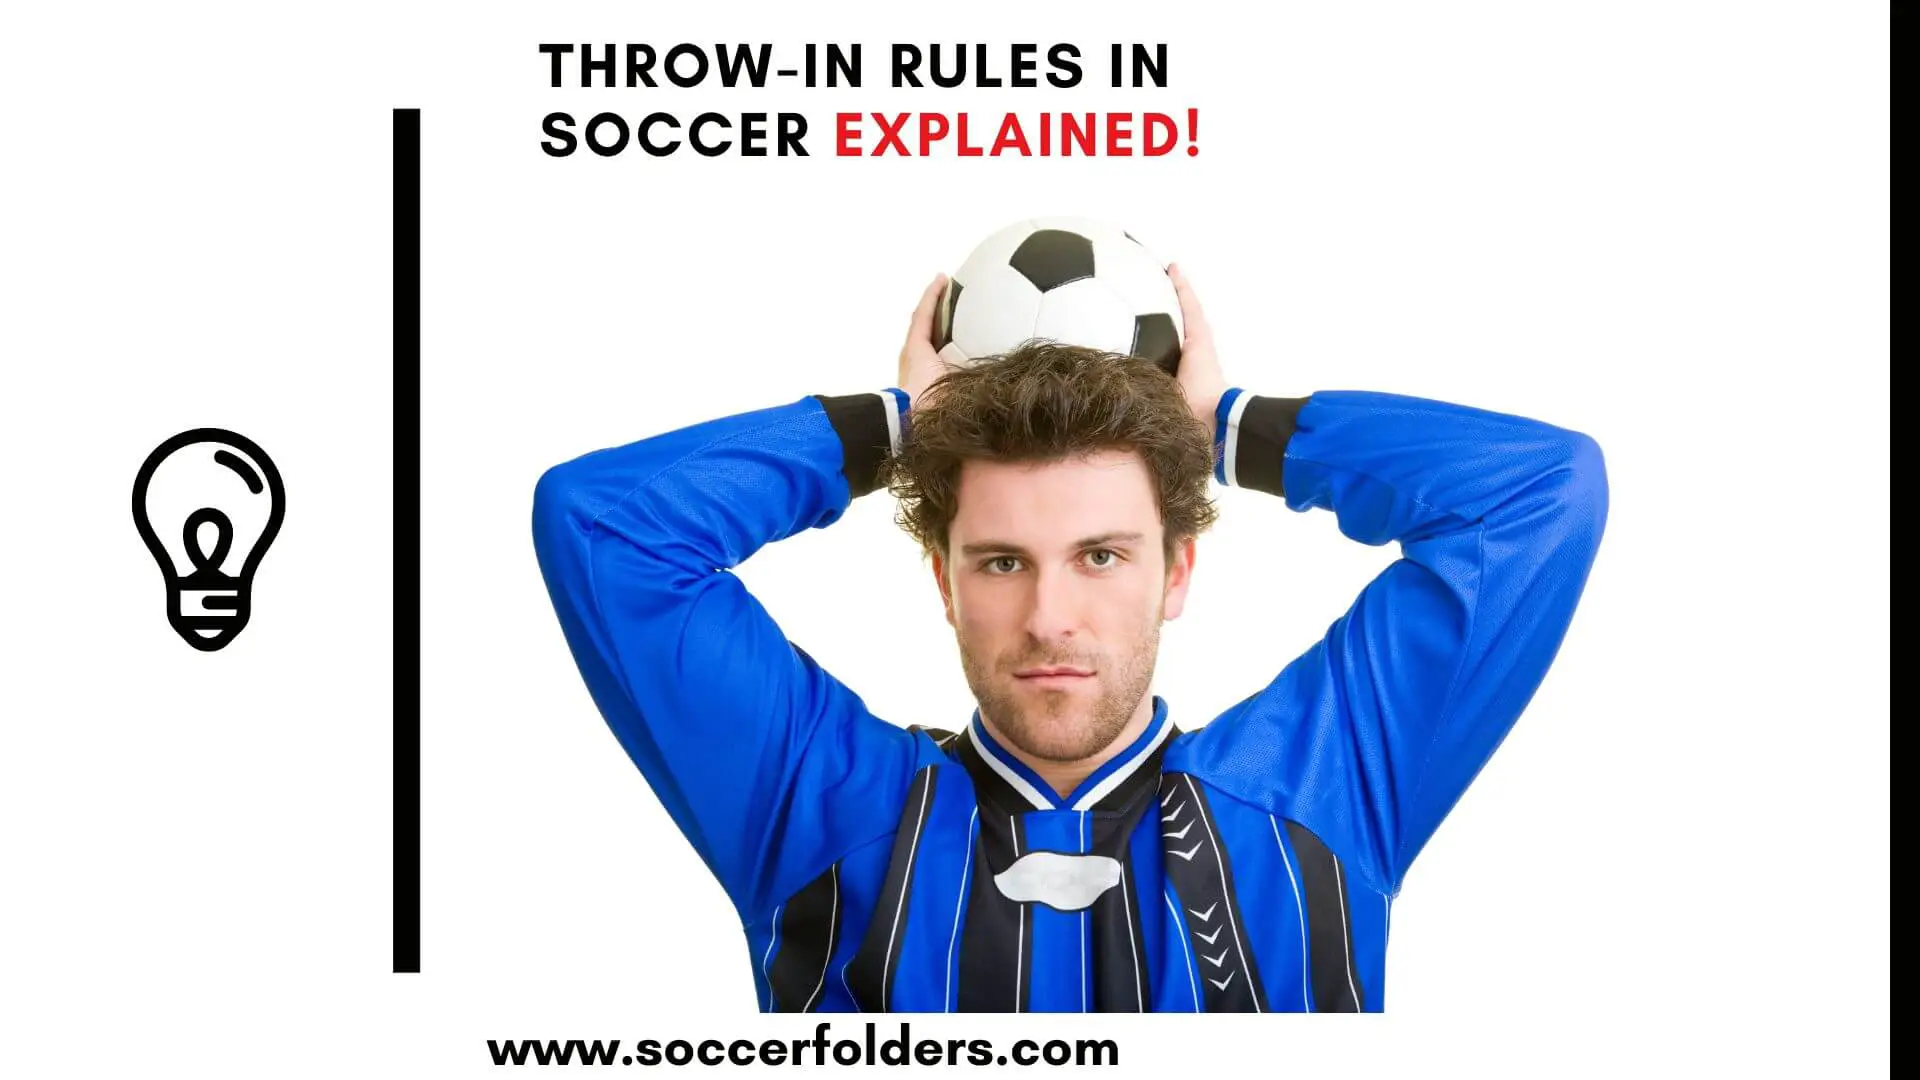 Throw in rules in soccer - Featured image